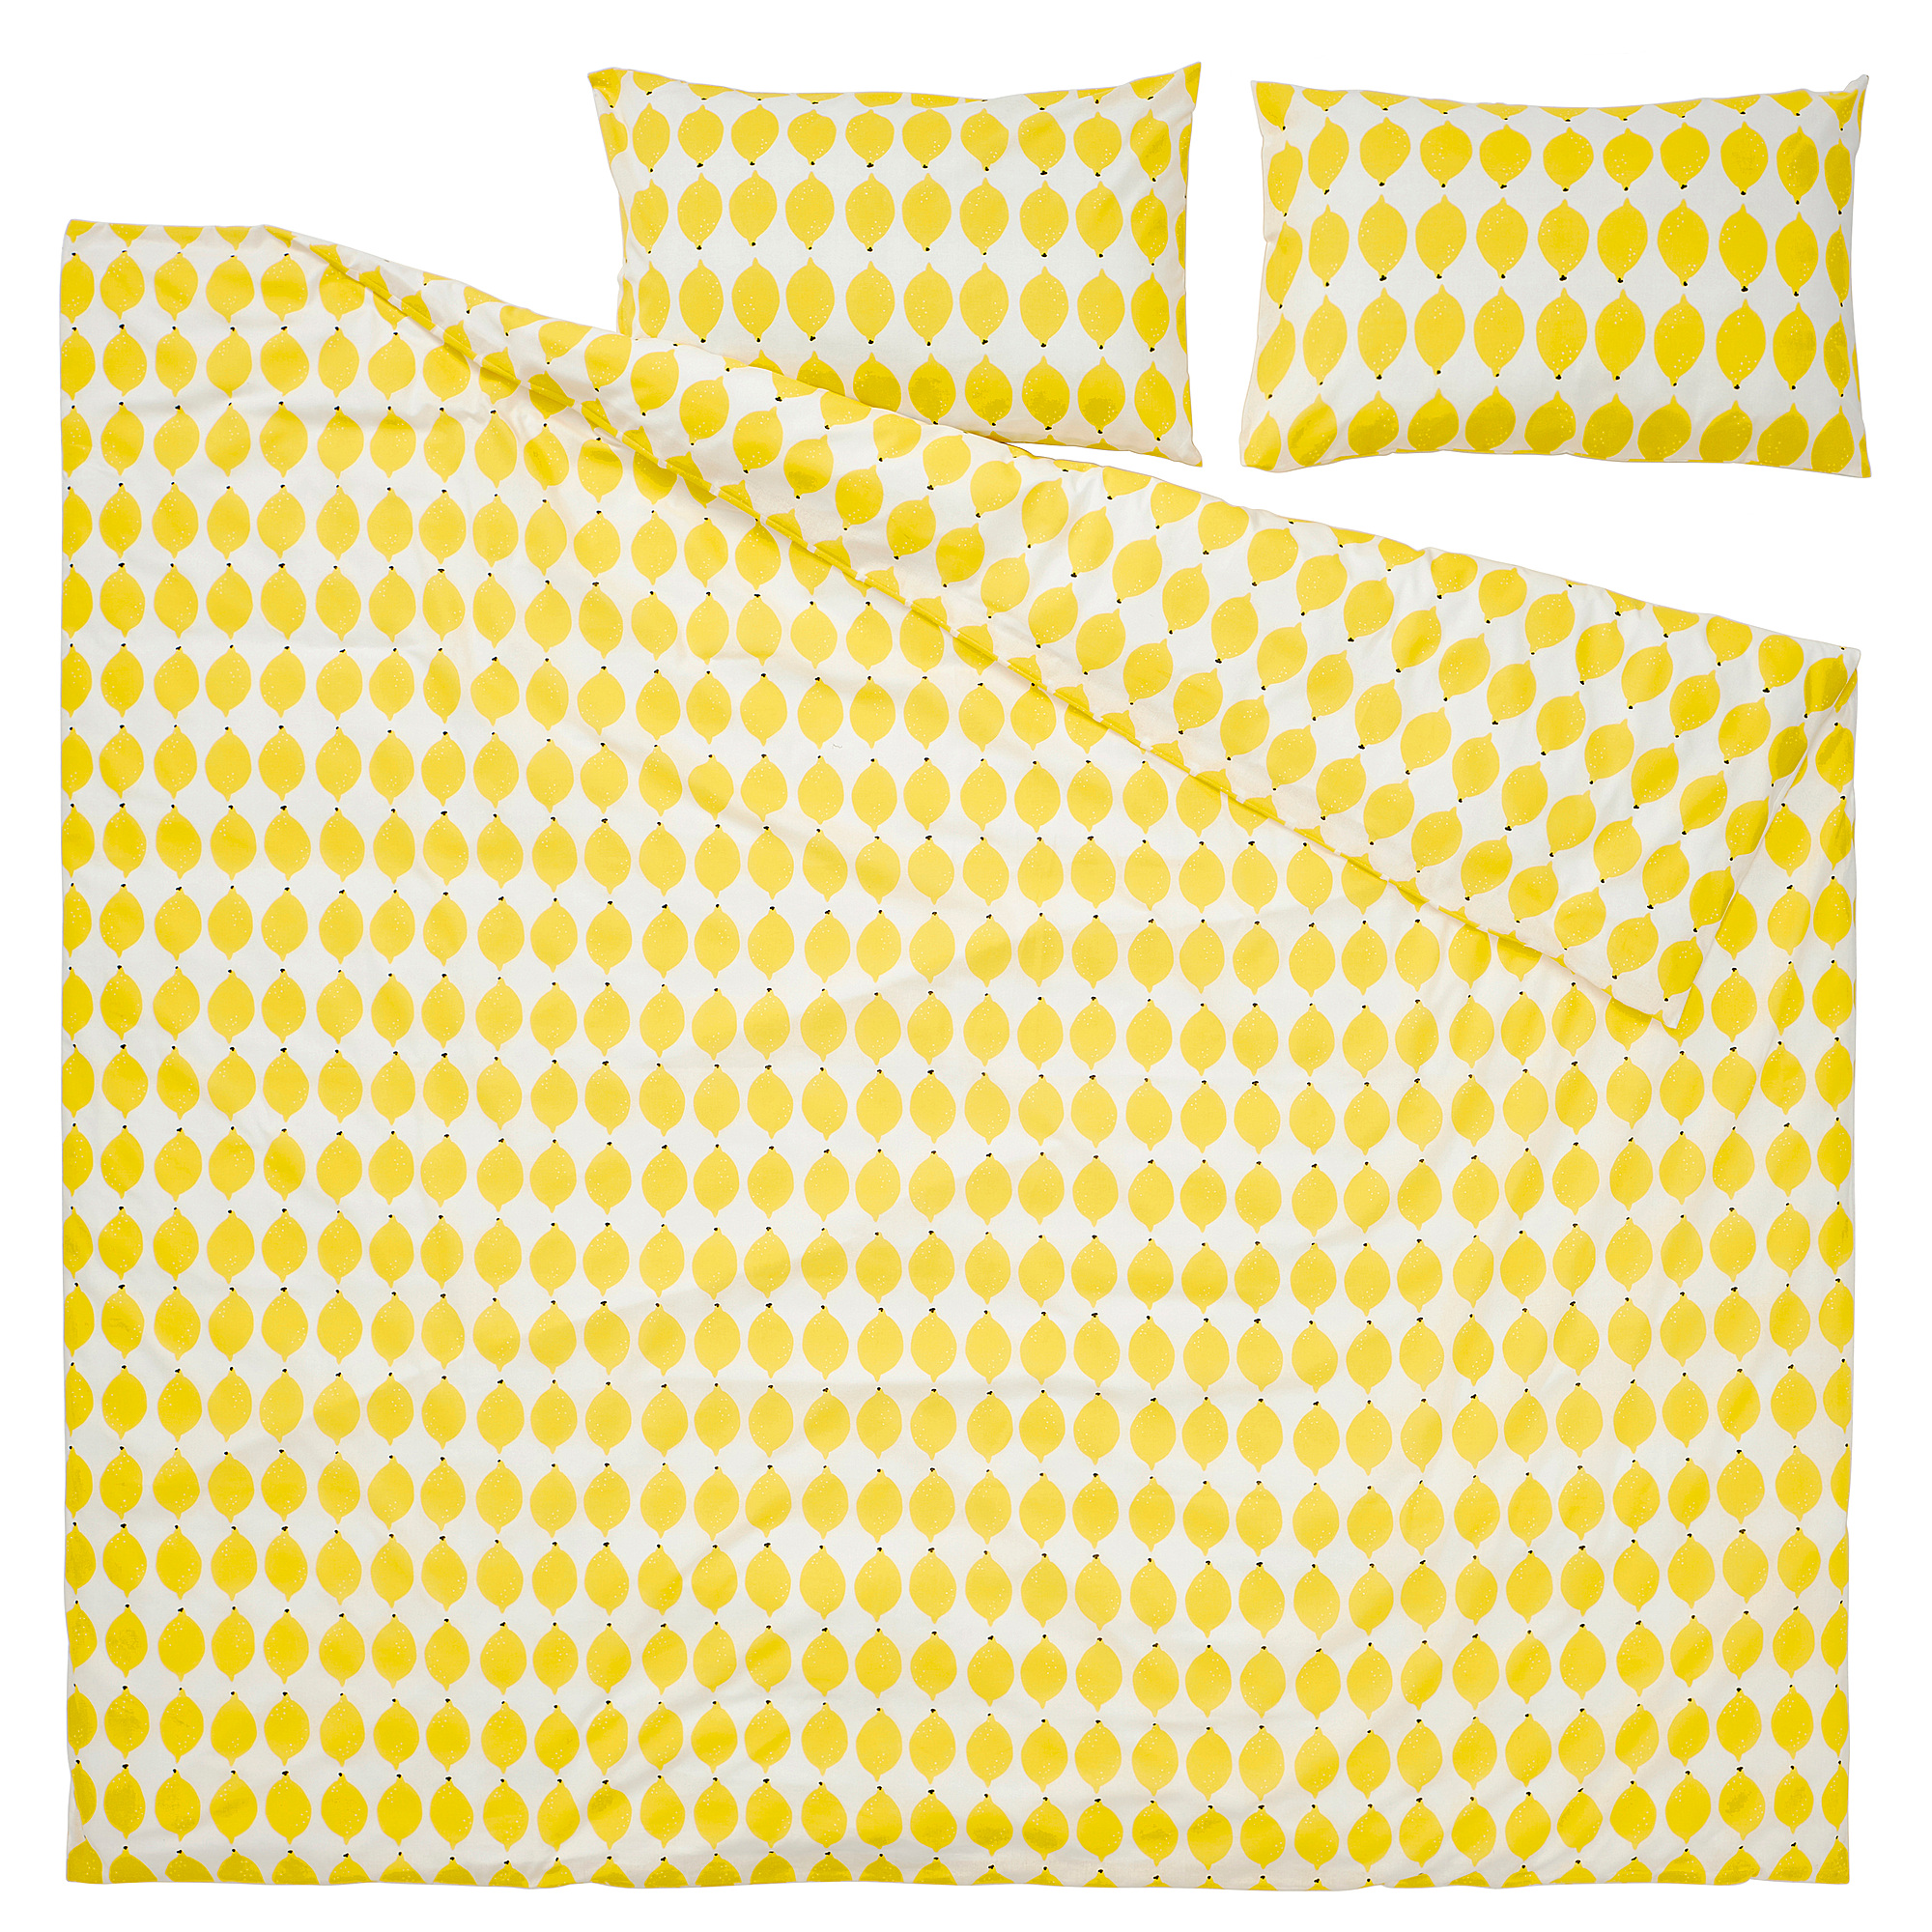 NORSKNOPPA duvet cover and 2 pillowcases